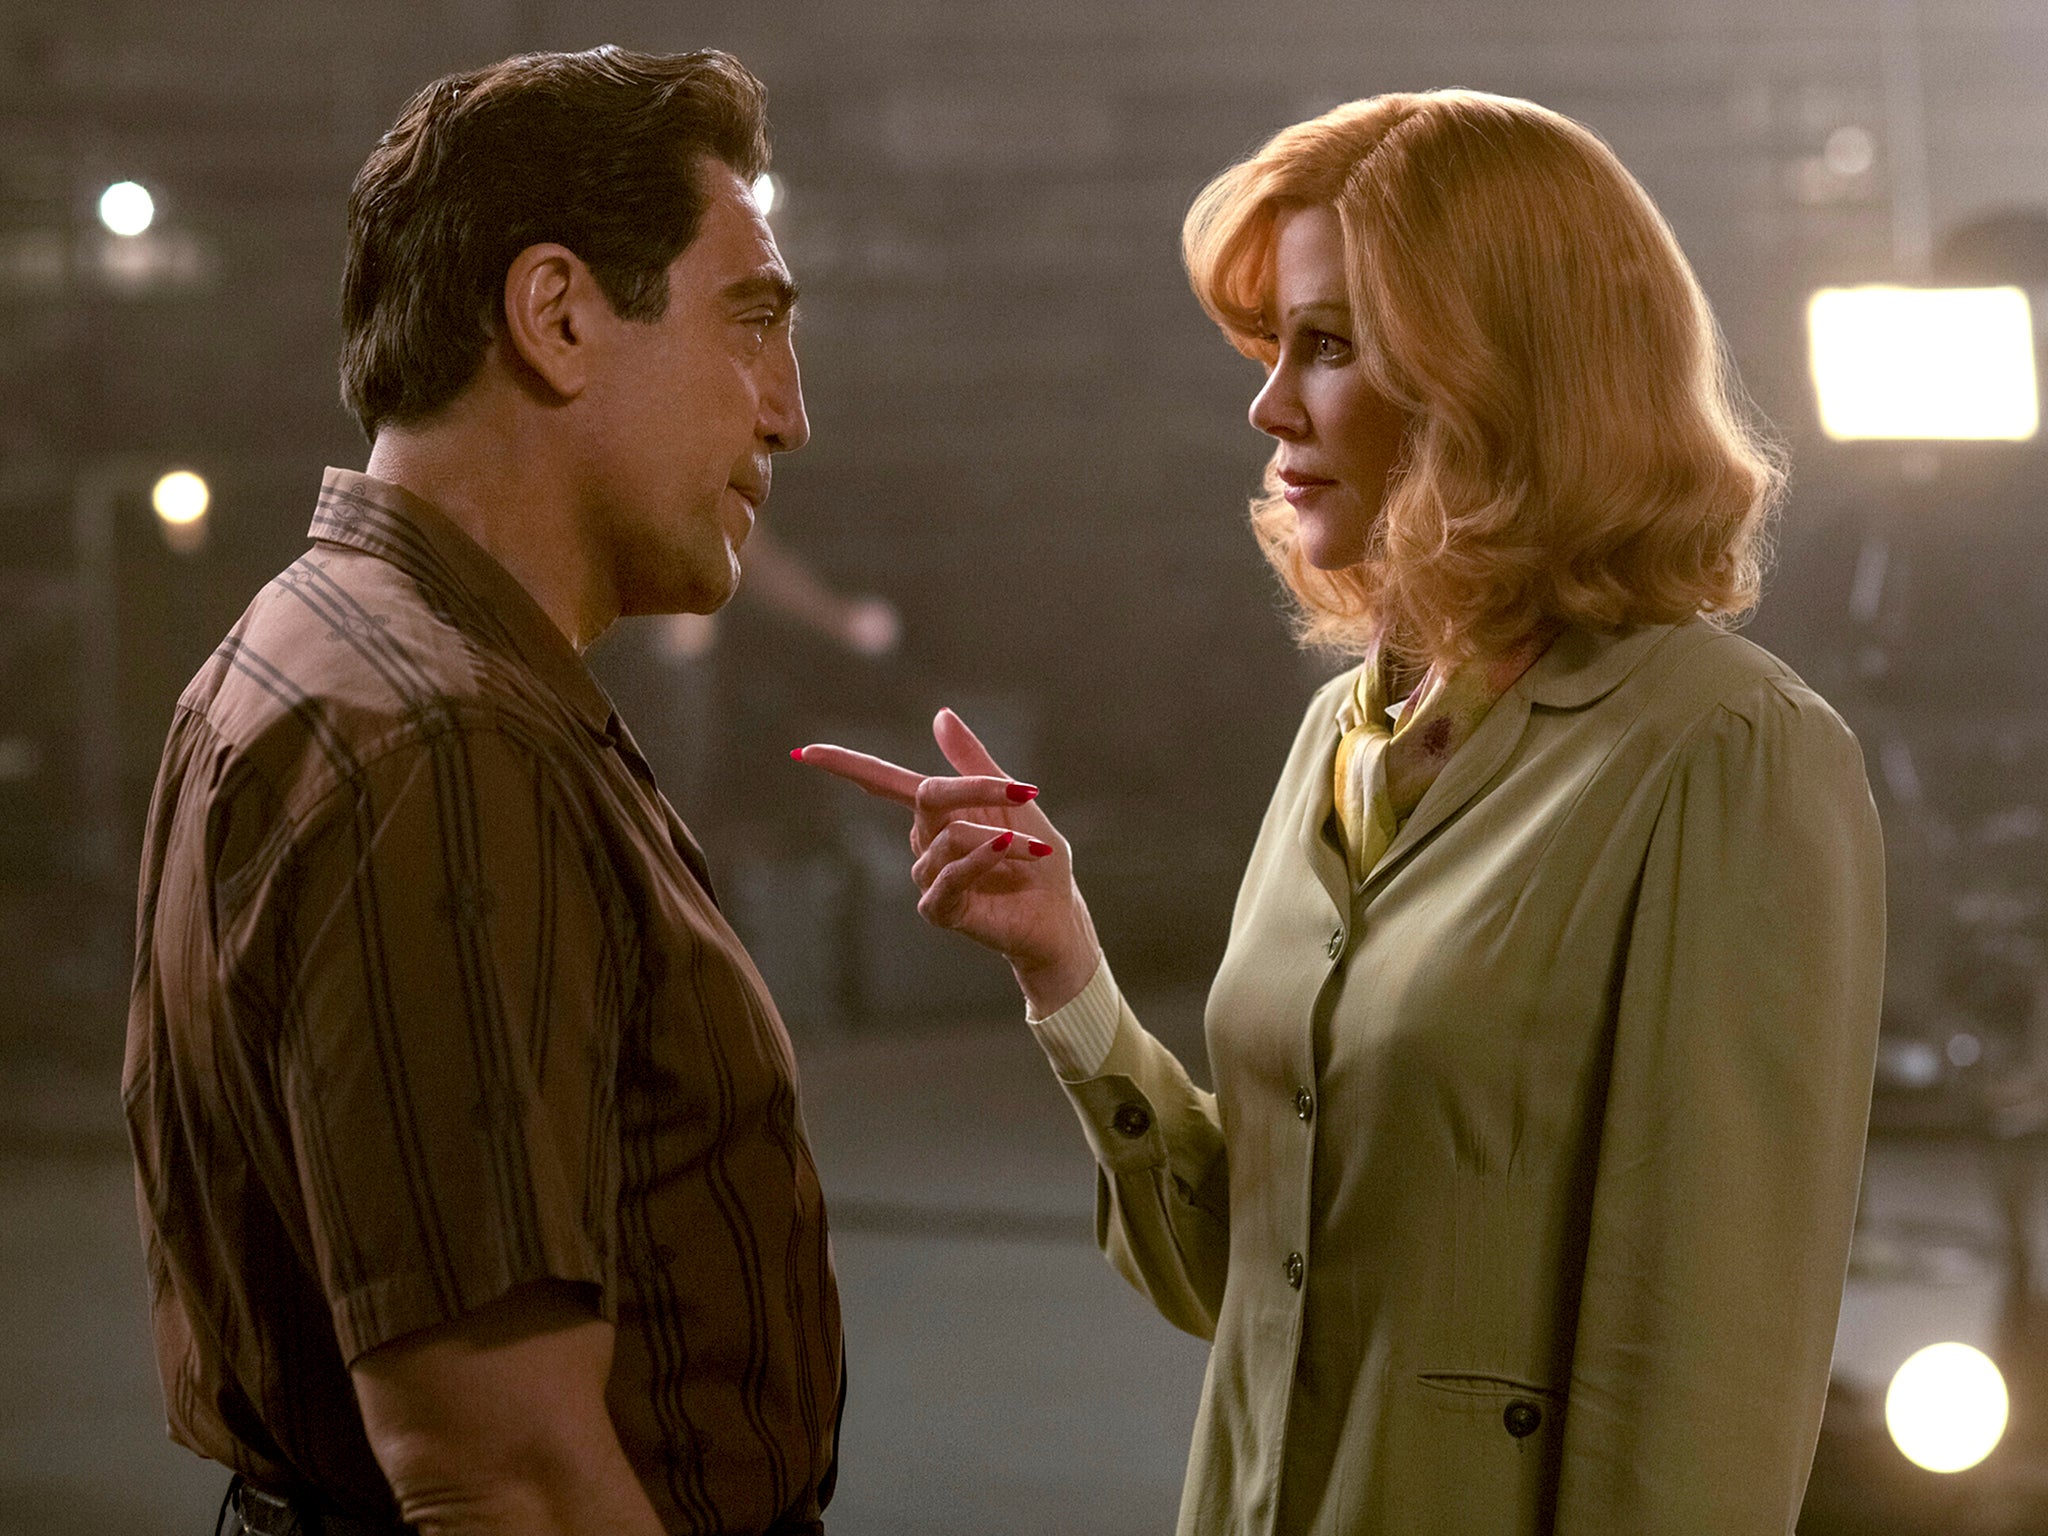 Kidman as Lucille Ball and Javier Bardem as Desi Arnaz in a scene from ‘Being the Ricardos’